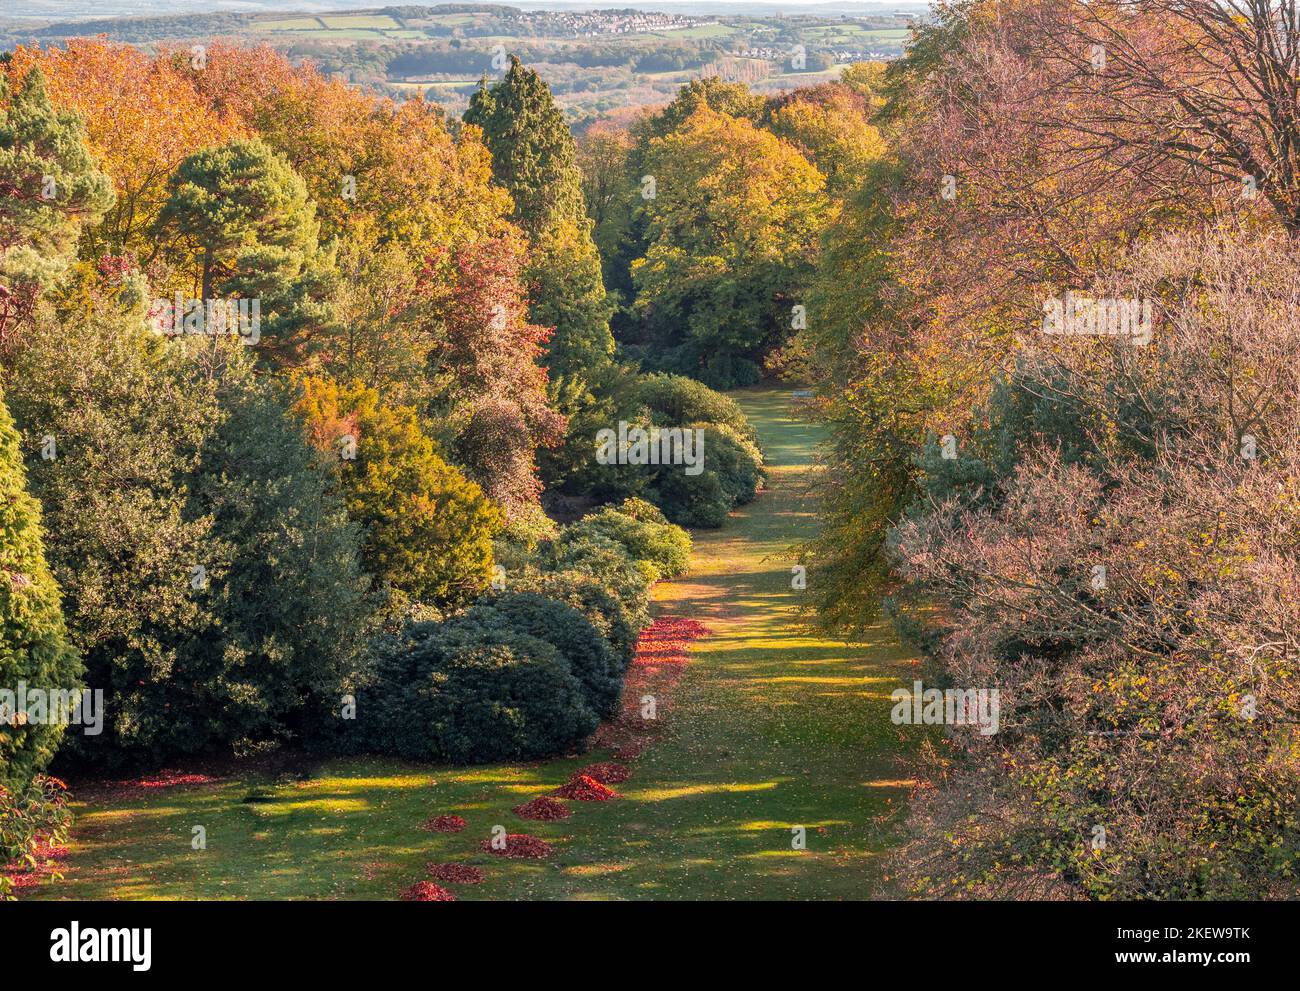 Elevated view of fallen leaves on a lawn swept into piles ready to be composted. UK. Stock Photo